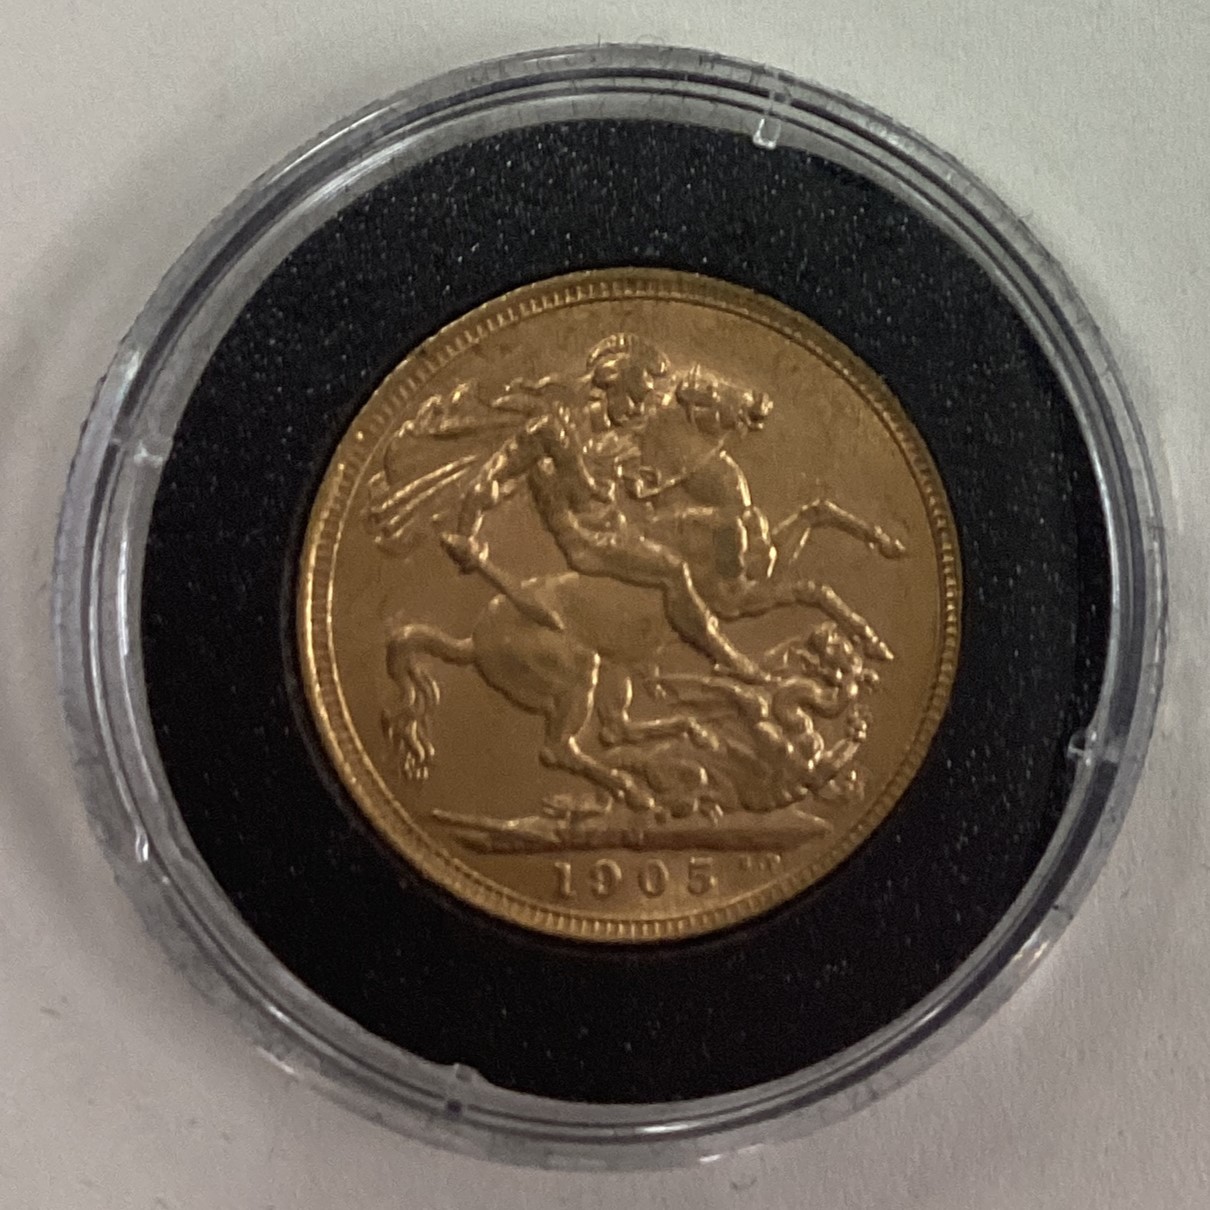 A 1905 gold Full Sovereign coin.